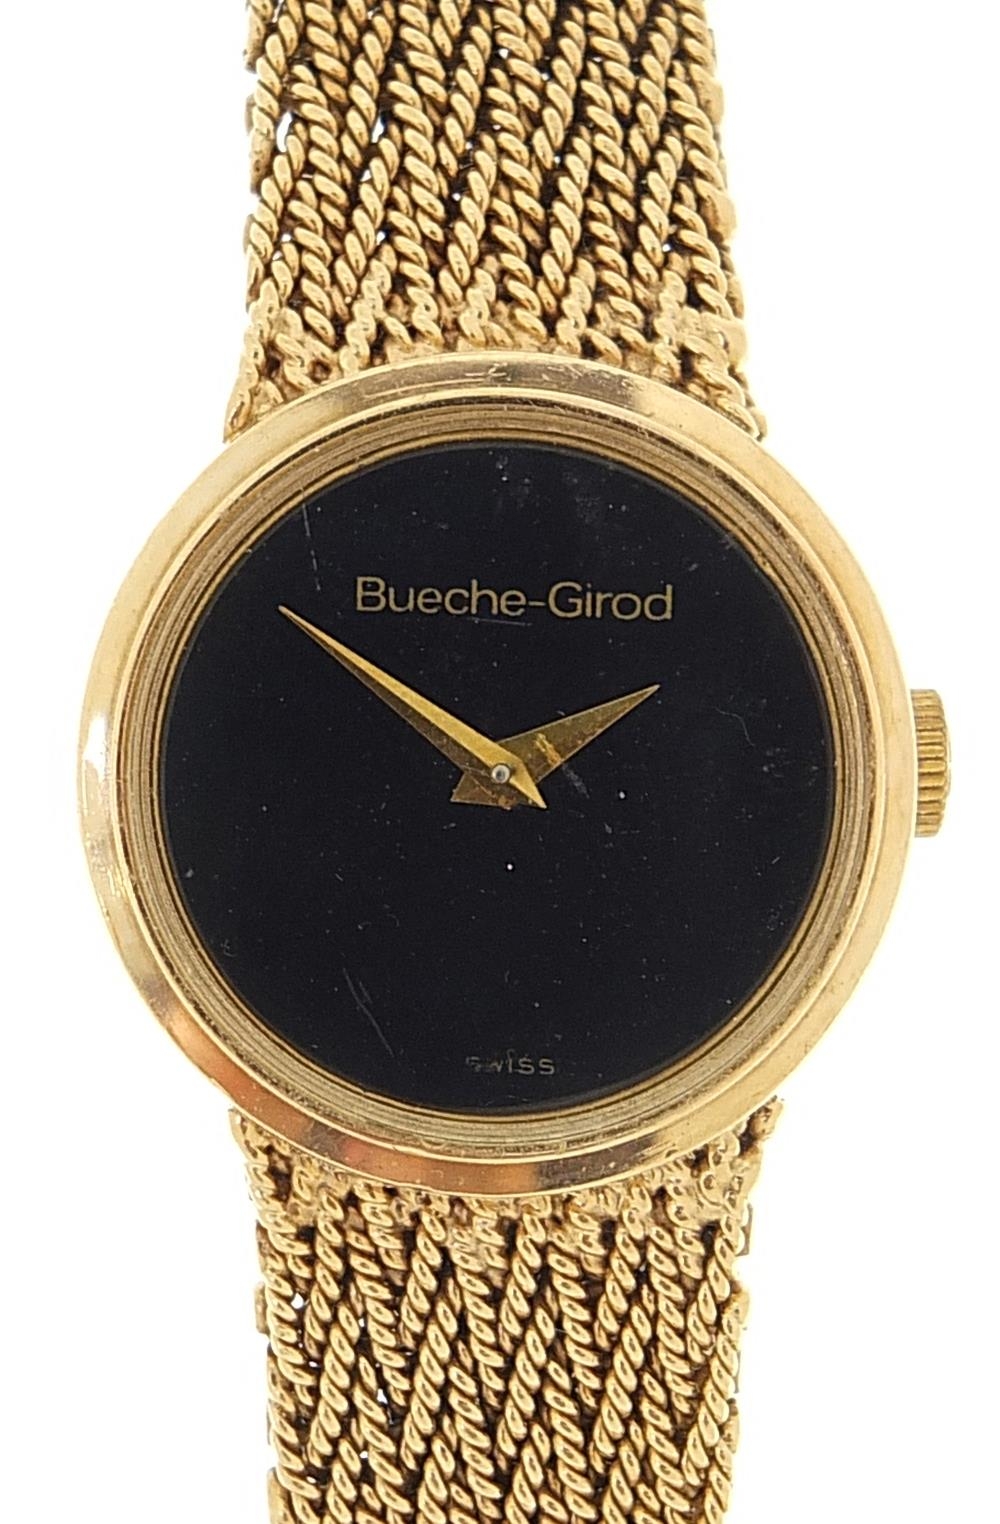 9ct gold Bueche Girod ladies wristwatch with 9ct gold strap, 49.7g